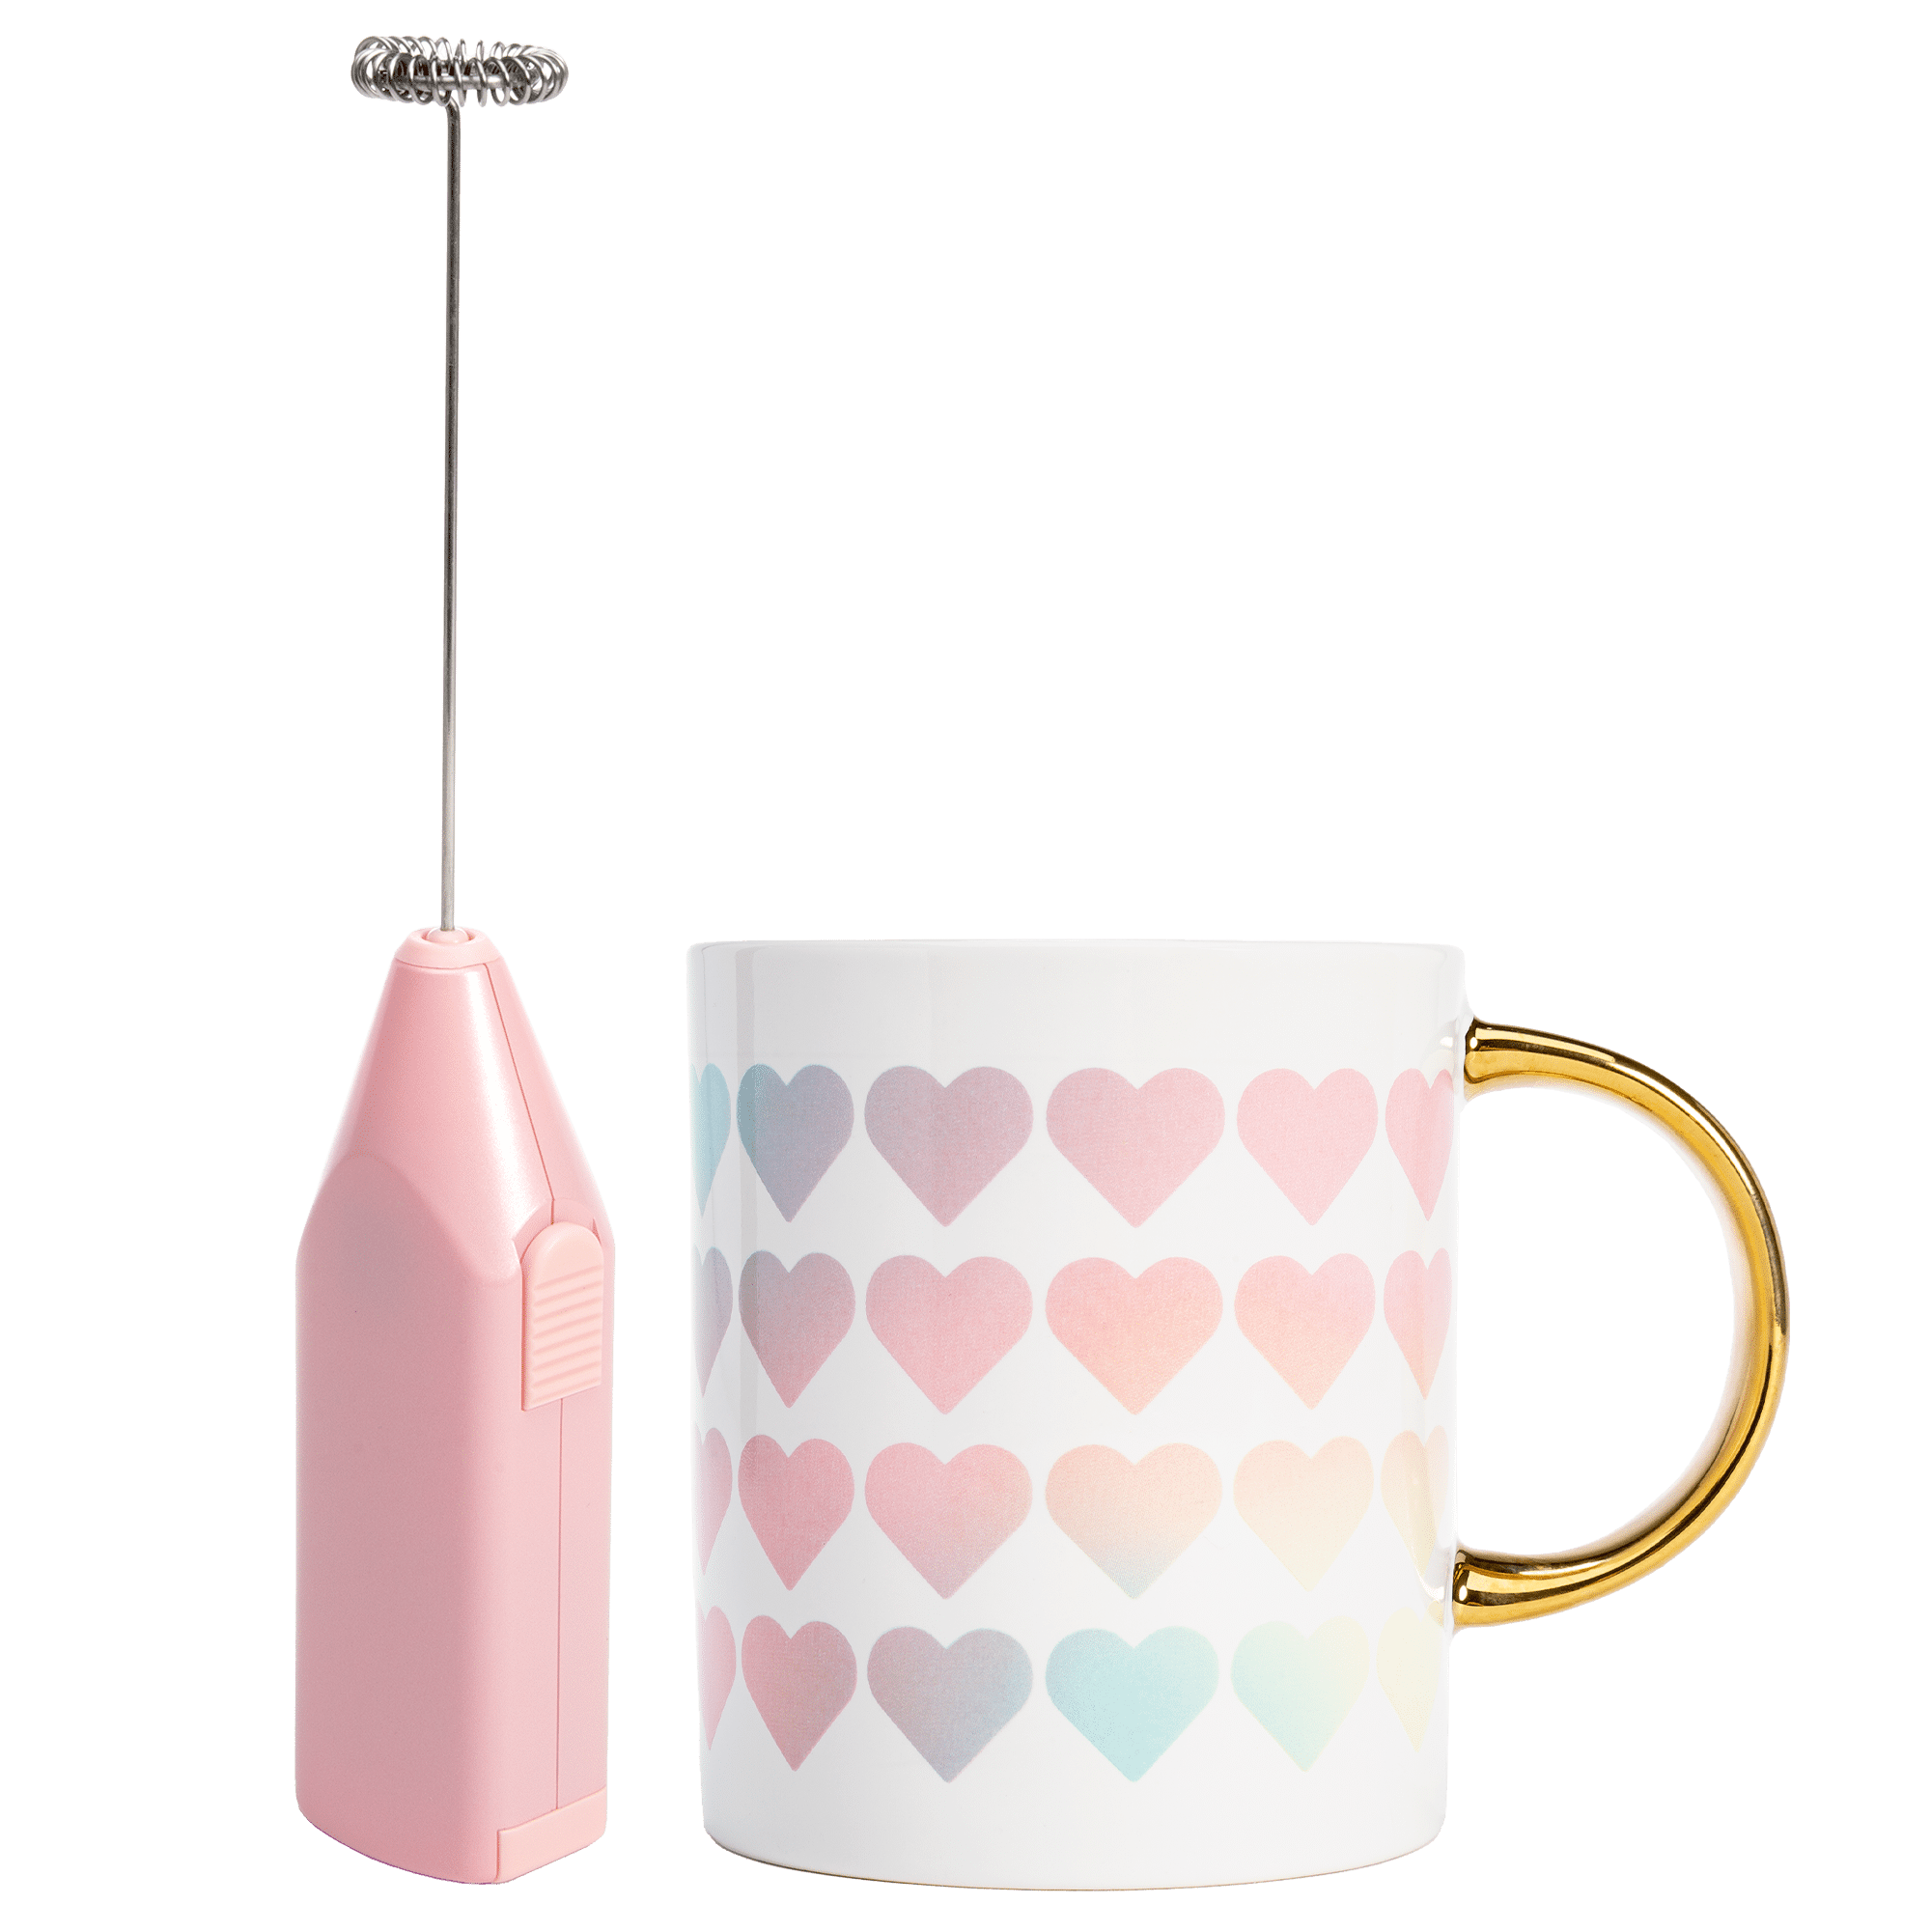 Paris Hilton Electric Frother, Handheld Drink Mixer, Battery Powered, 2AA  Batteries Included, Pink